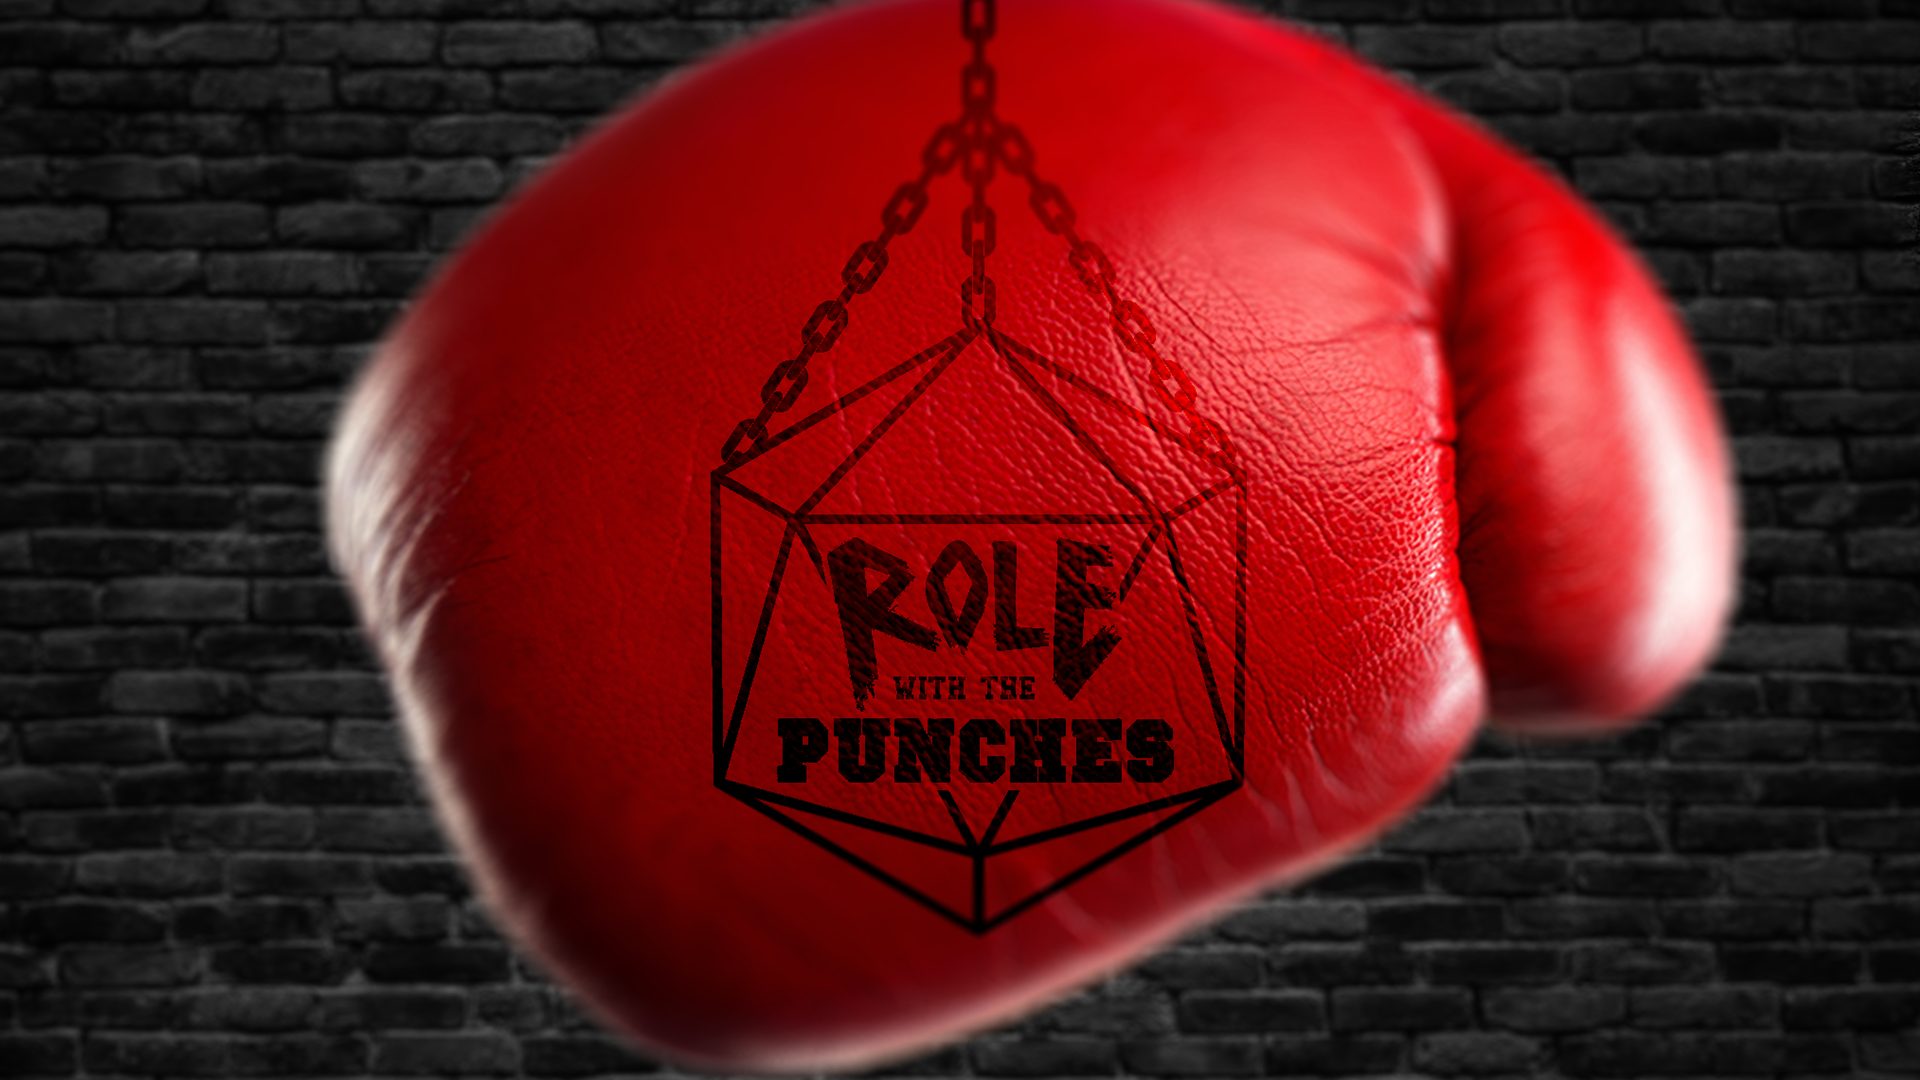 Role With The Punches